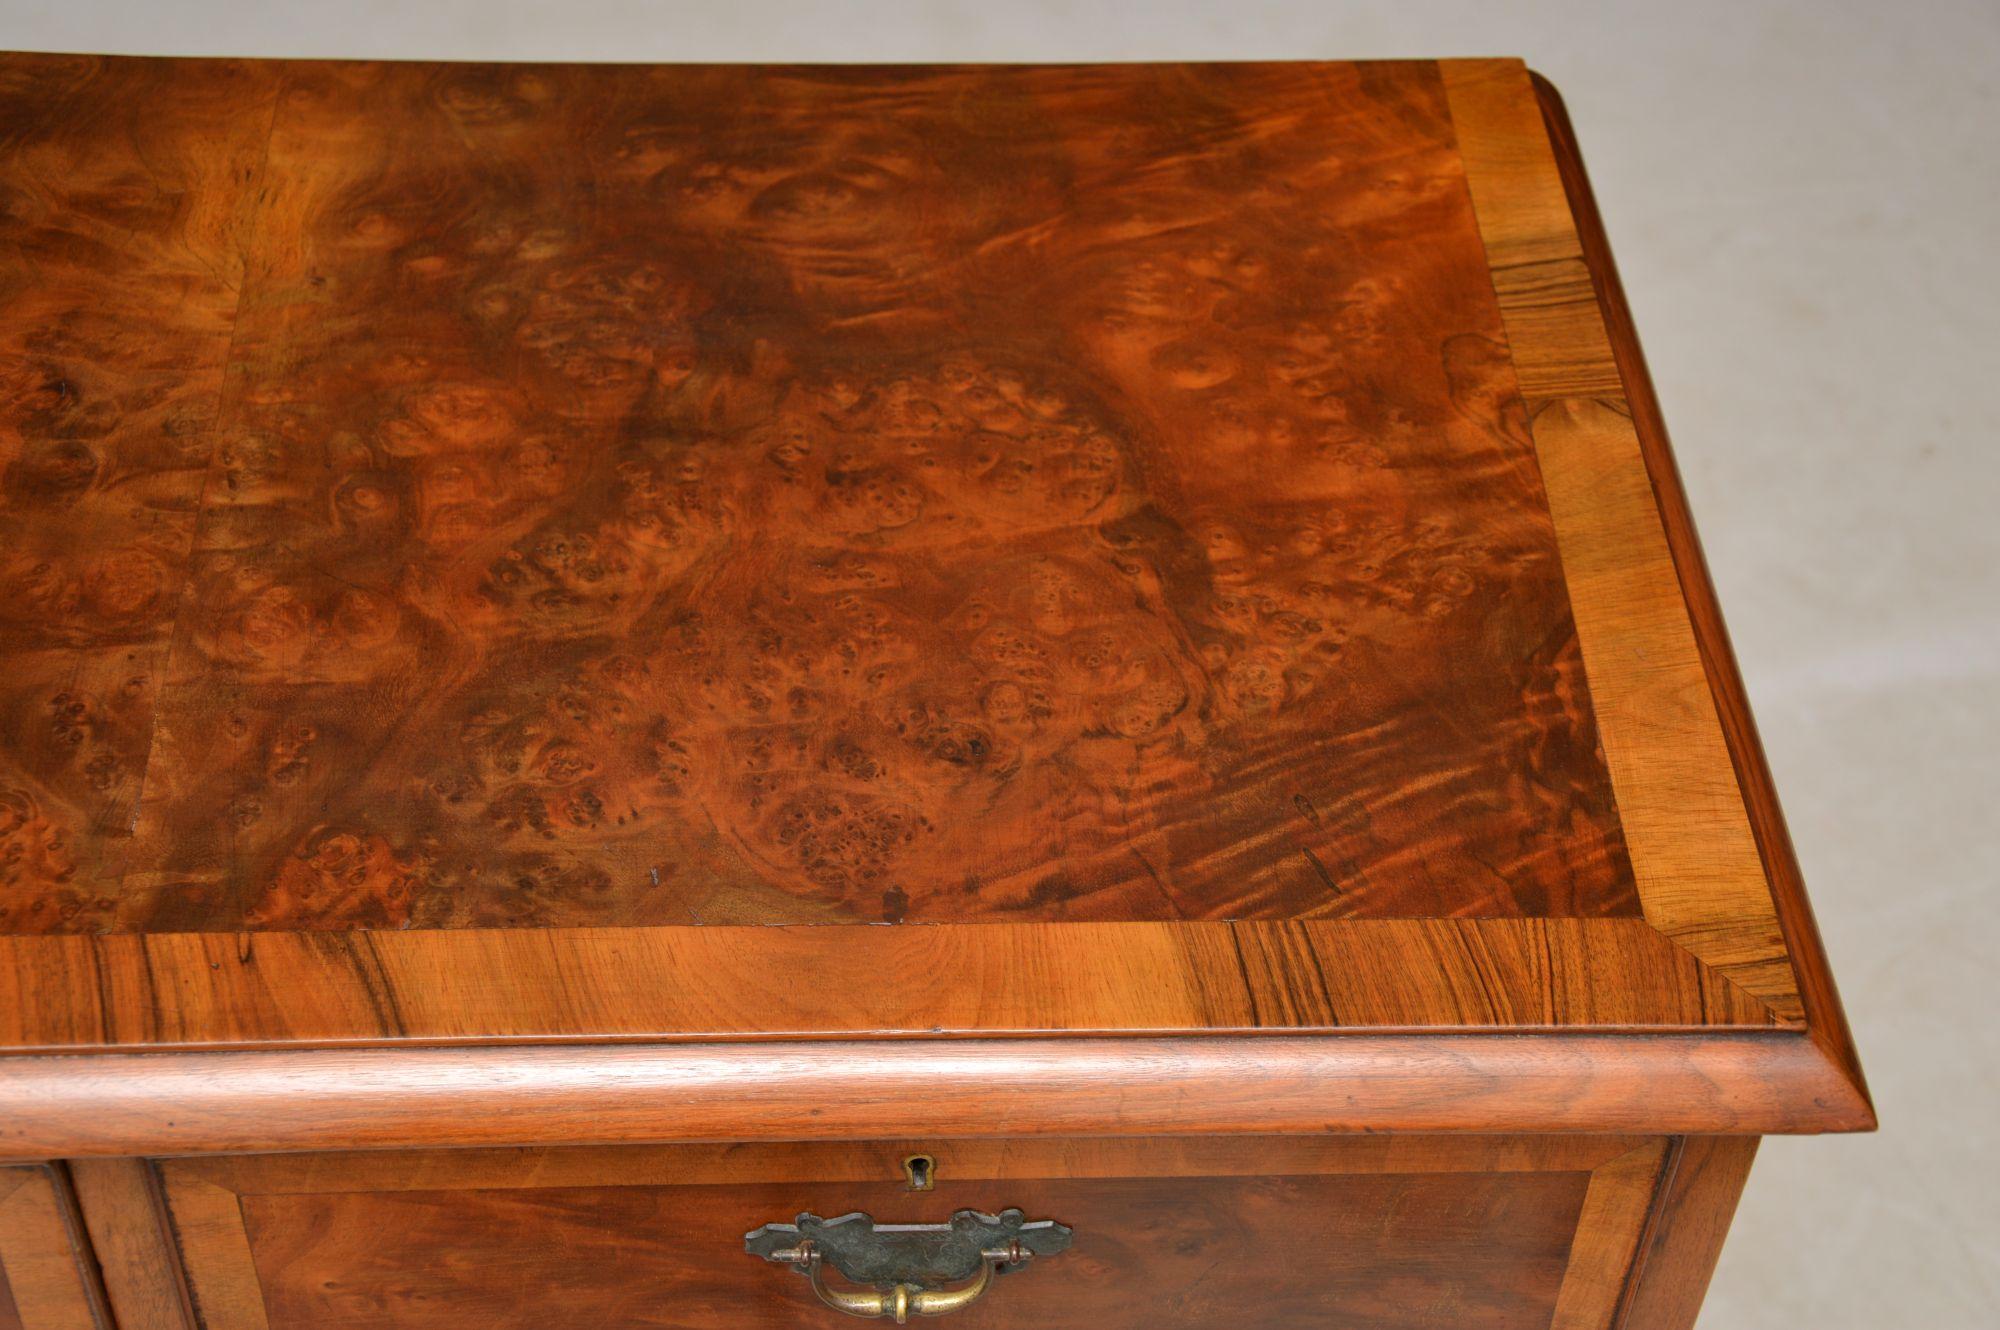 20th Century Antique Burr Walnut Chest of Drawers